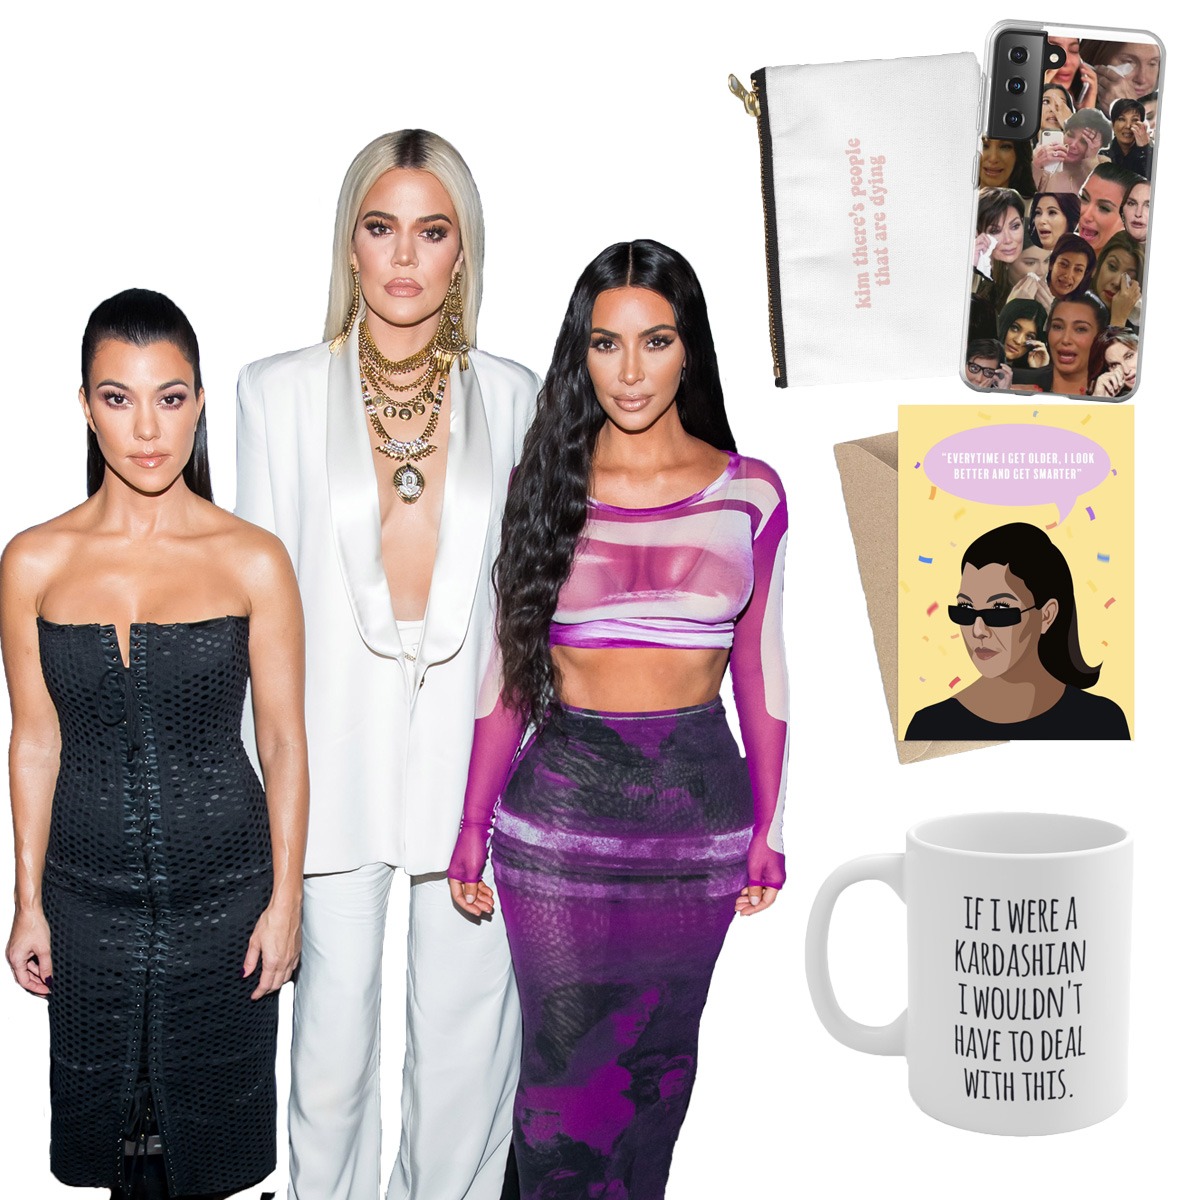 Your Ultimate The Kardashians Gift Guide, Bible! - E! Online